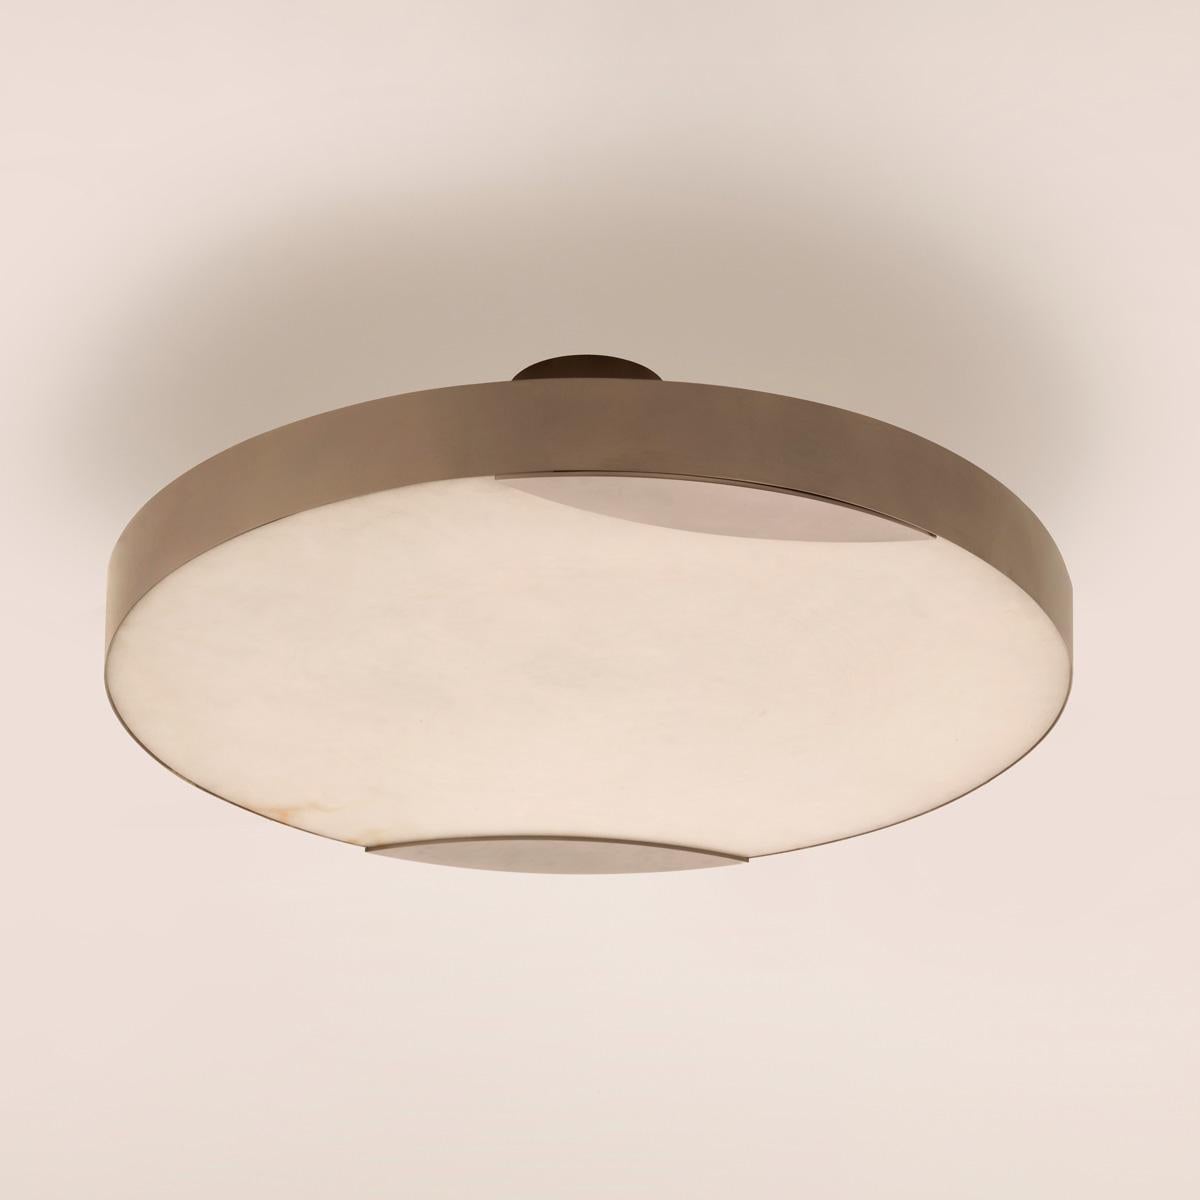 Italian Cloud N.1 Ceiling Light by Gaspare Asaro-Bronze Finish For Sale